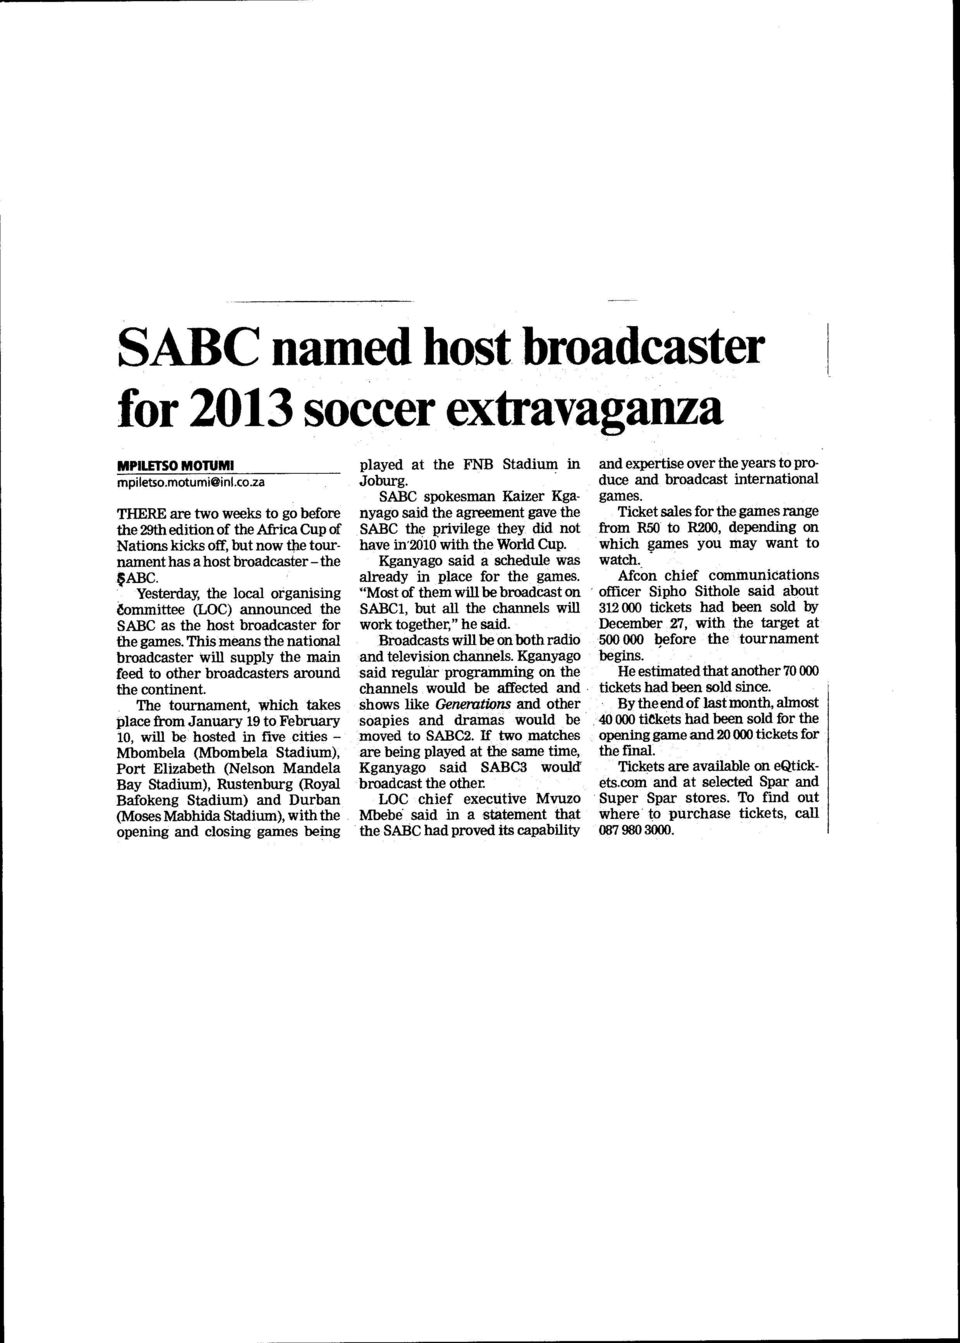 Yesterday, the local organising ommittee (LOC) announced the SABC as the host broadcaster for the games.